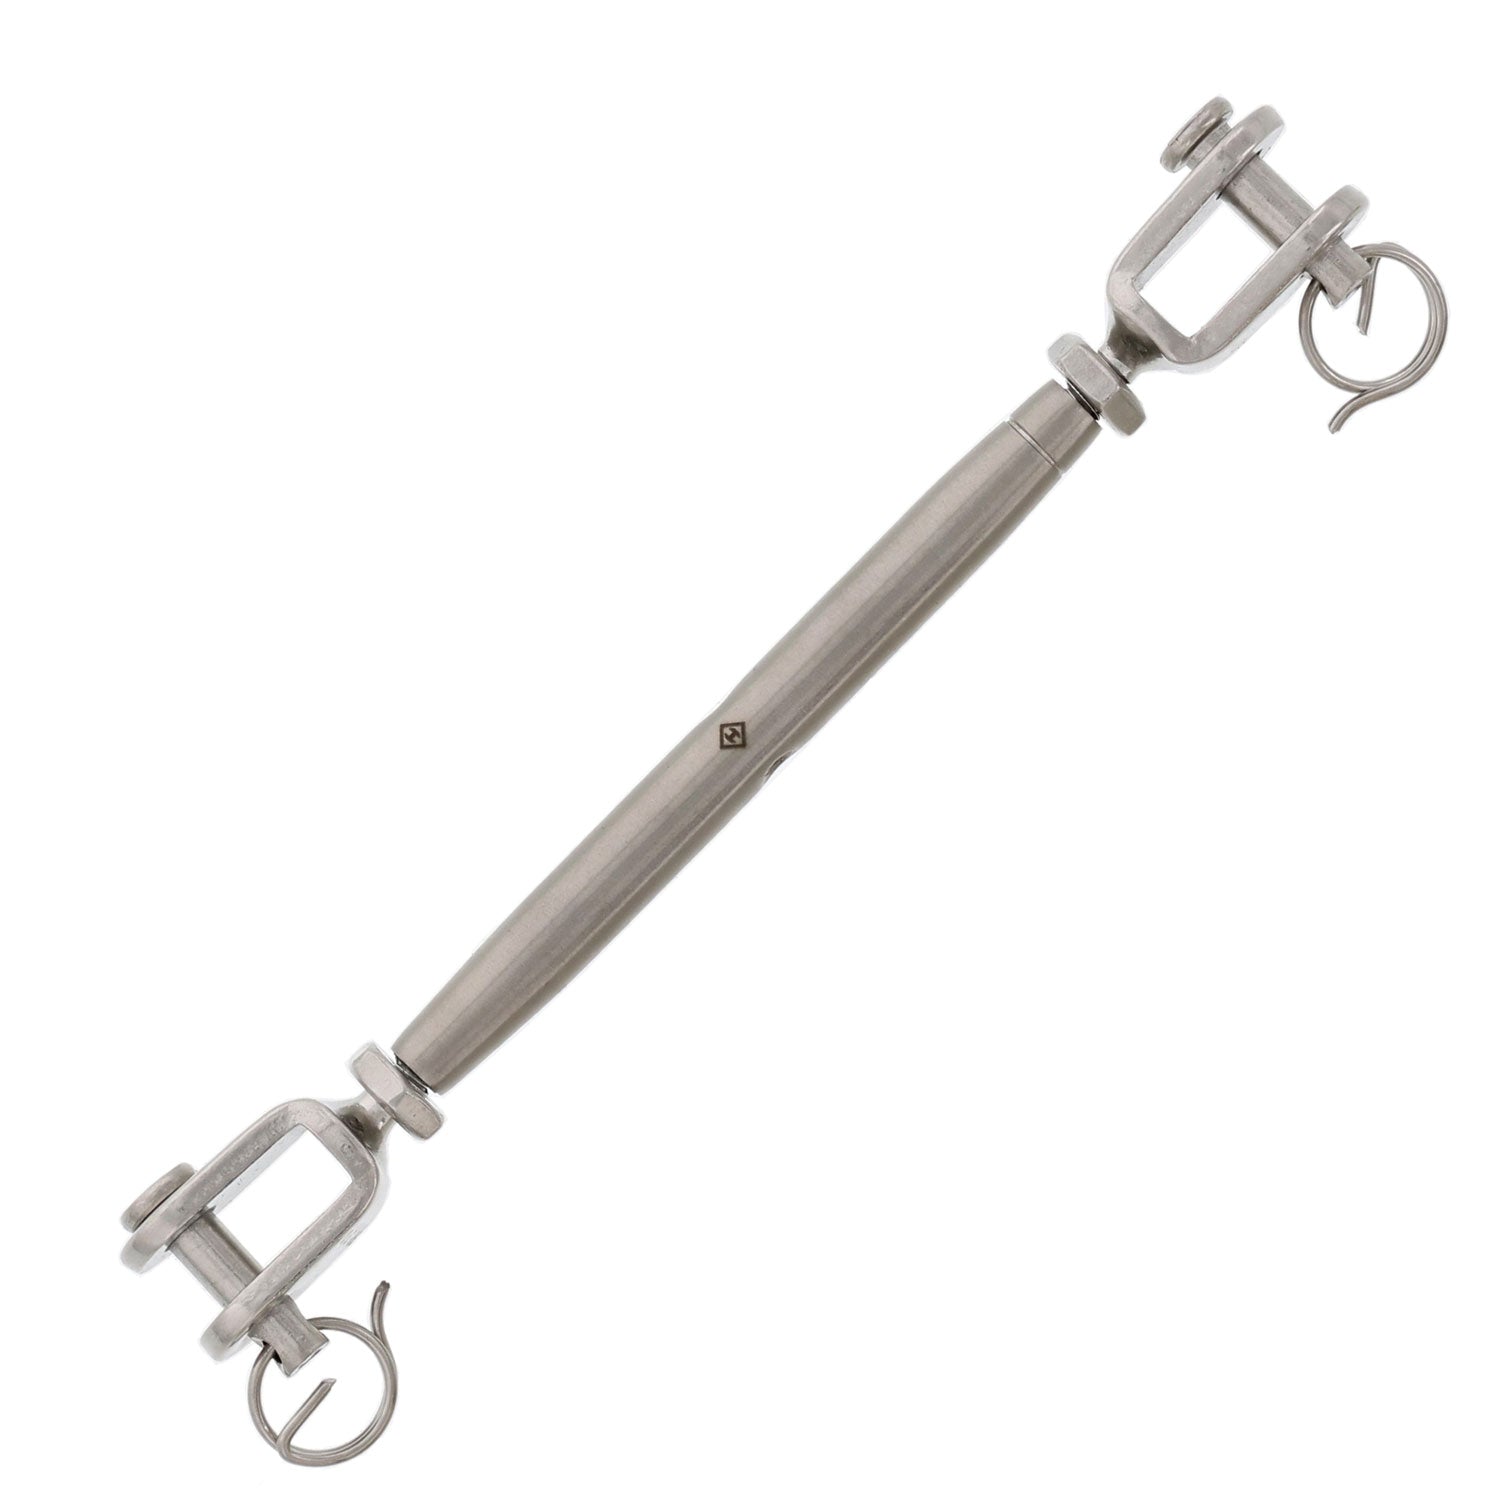 1/2 x 5 Stainless Steel Pipe Style Jaw x Jaw Turnbuckle 